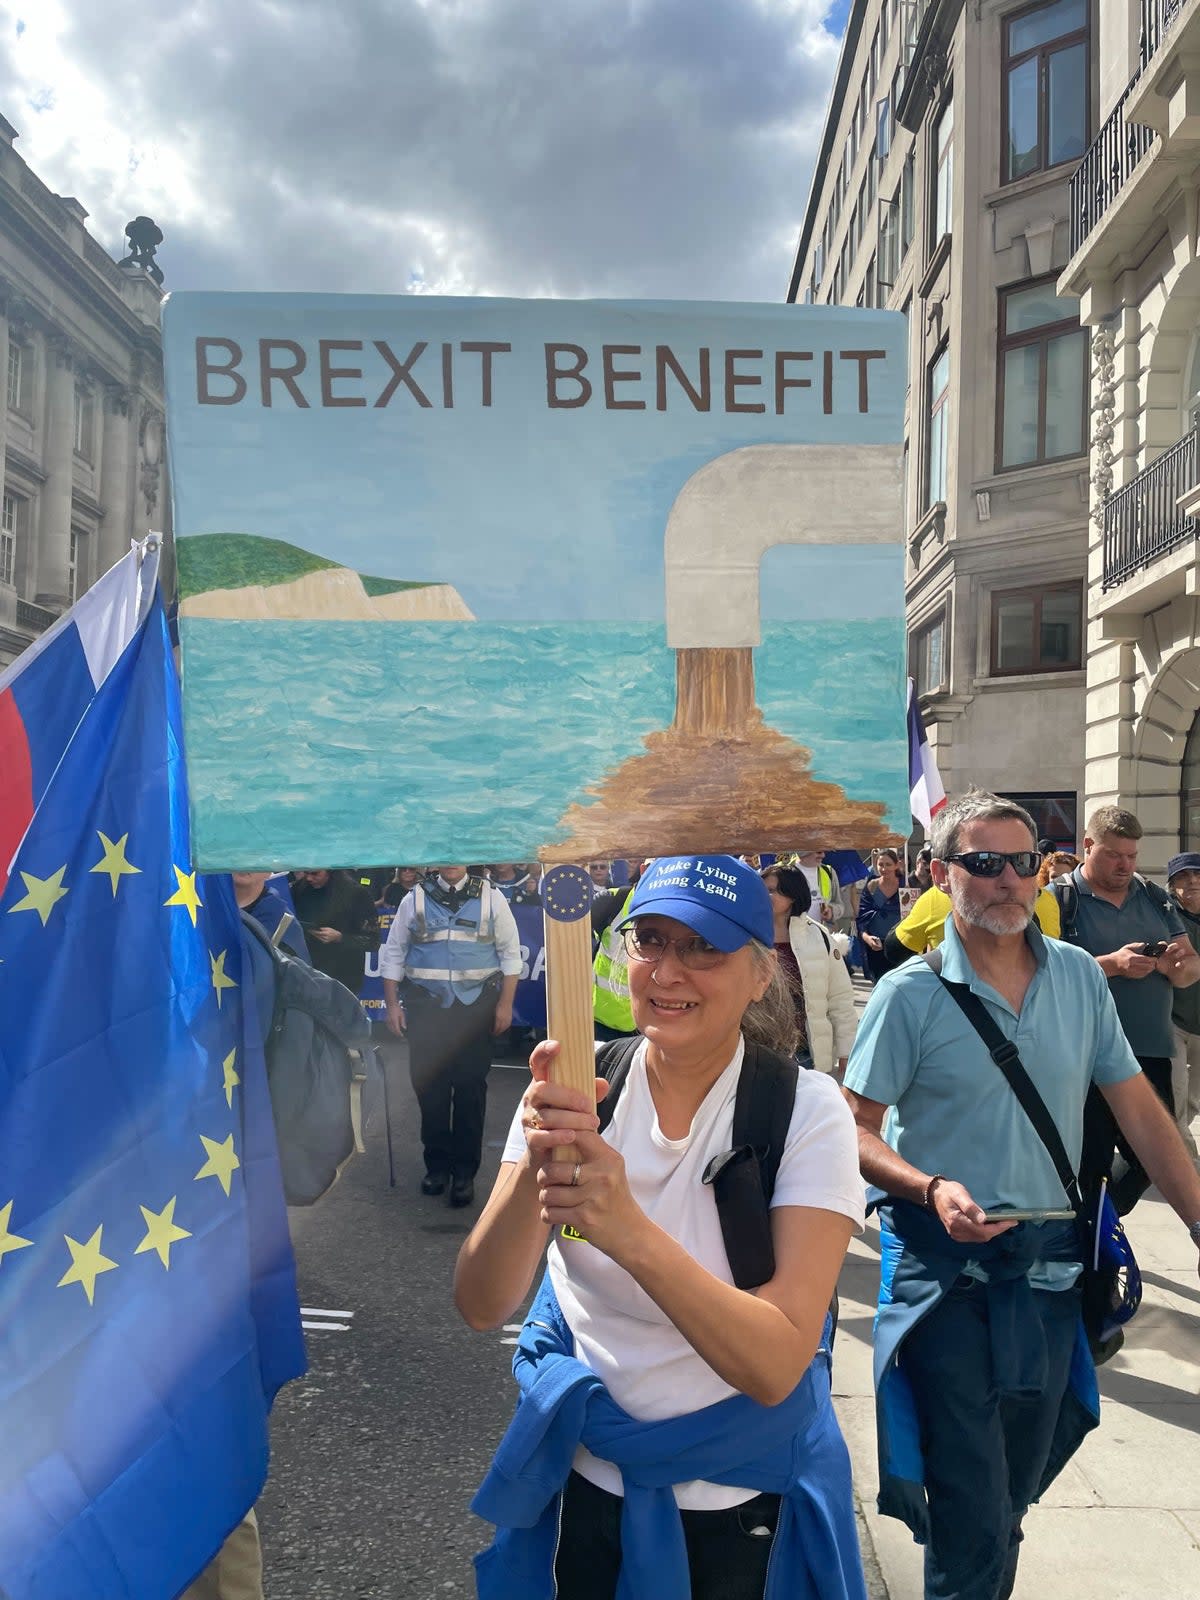 Anne Iacovazzo was among the pro-EU crowd (Barney Davis/The Independent)